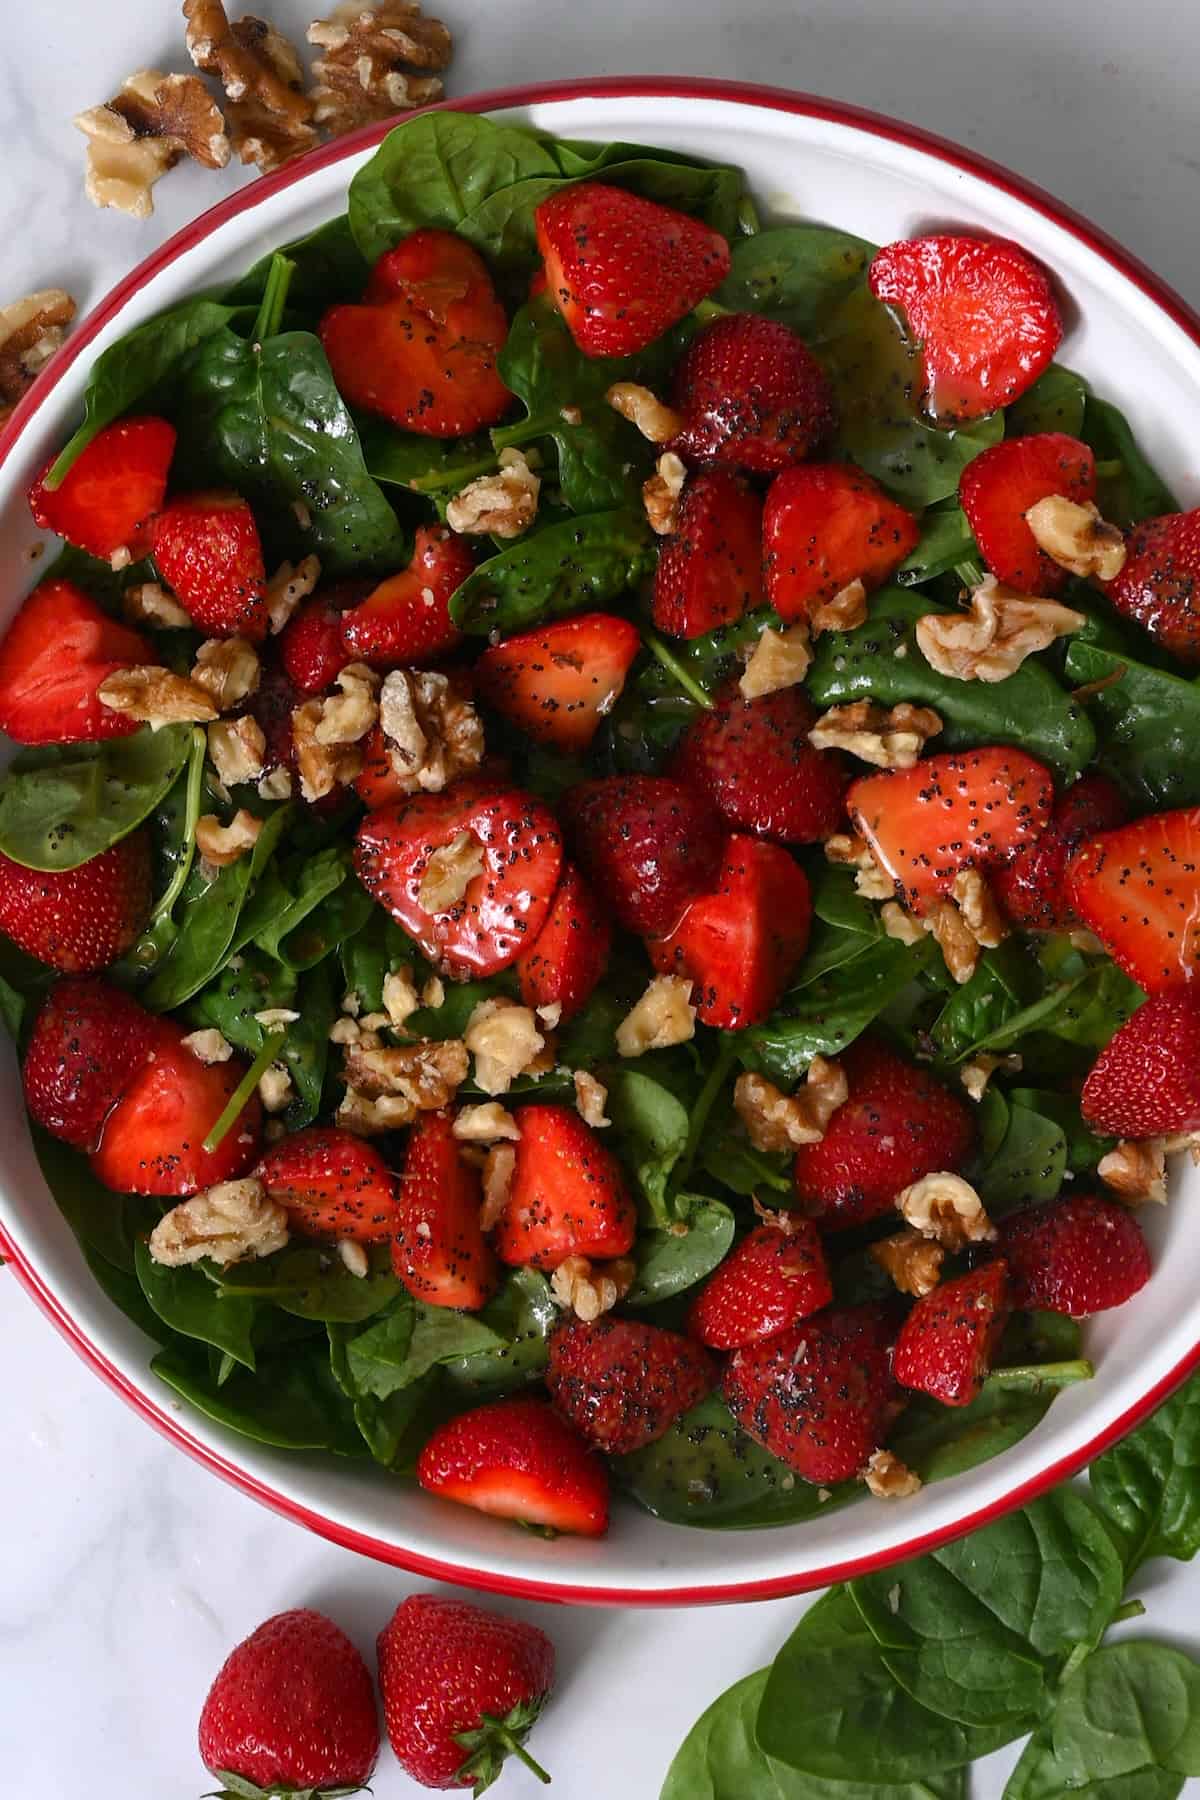 Strawberry salad with poppy seed dressing